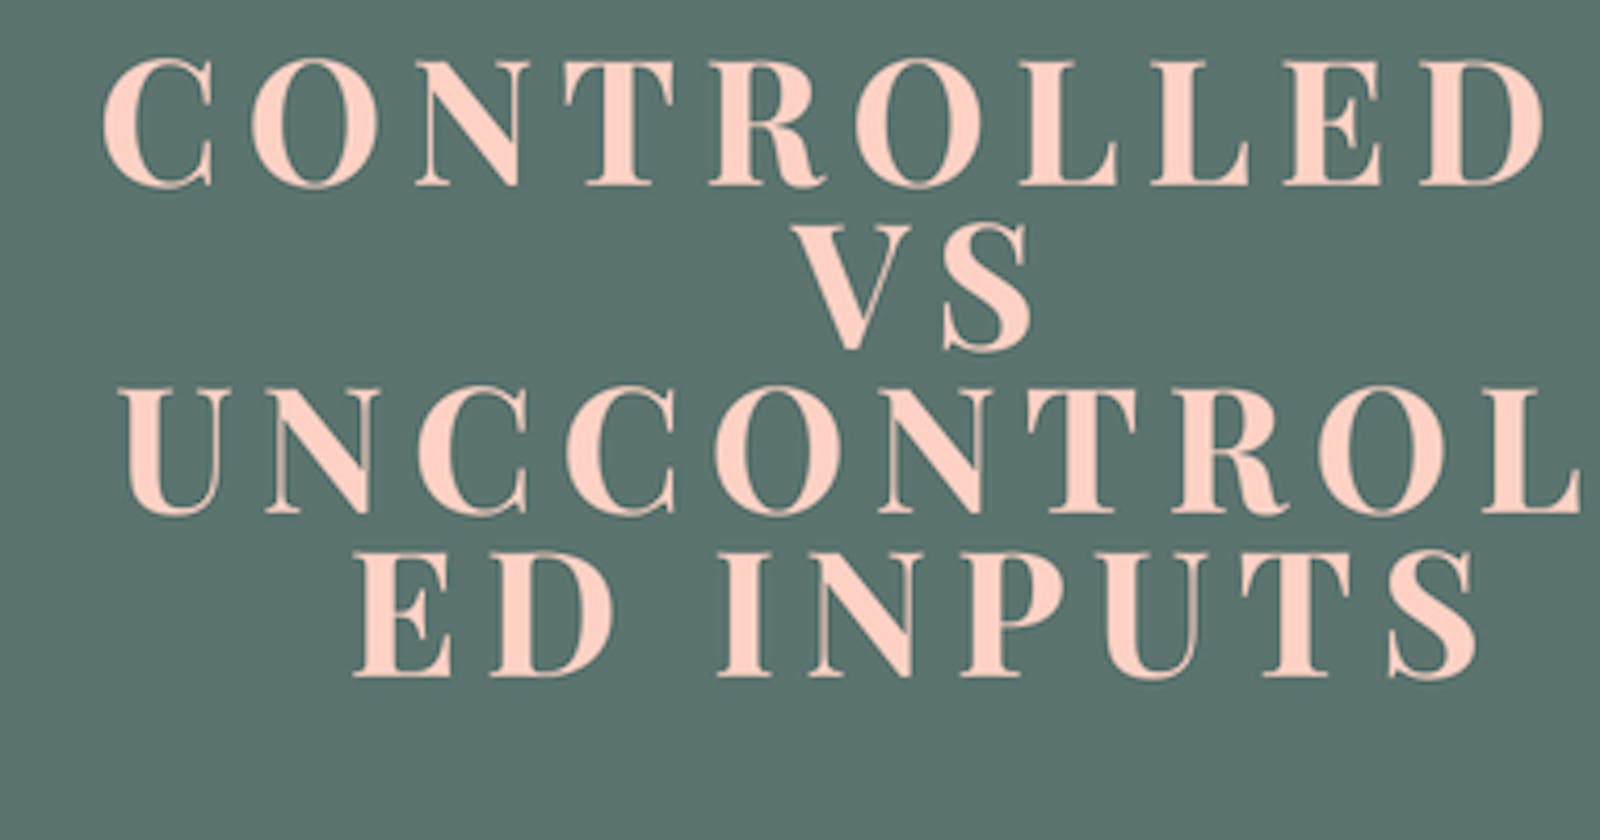 Controlled vs uncontrolled inputs